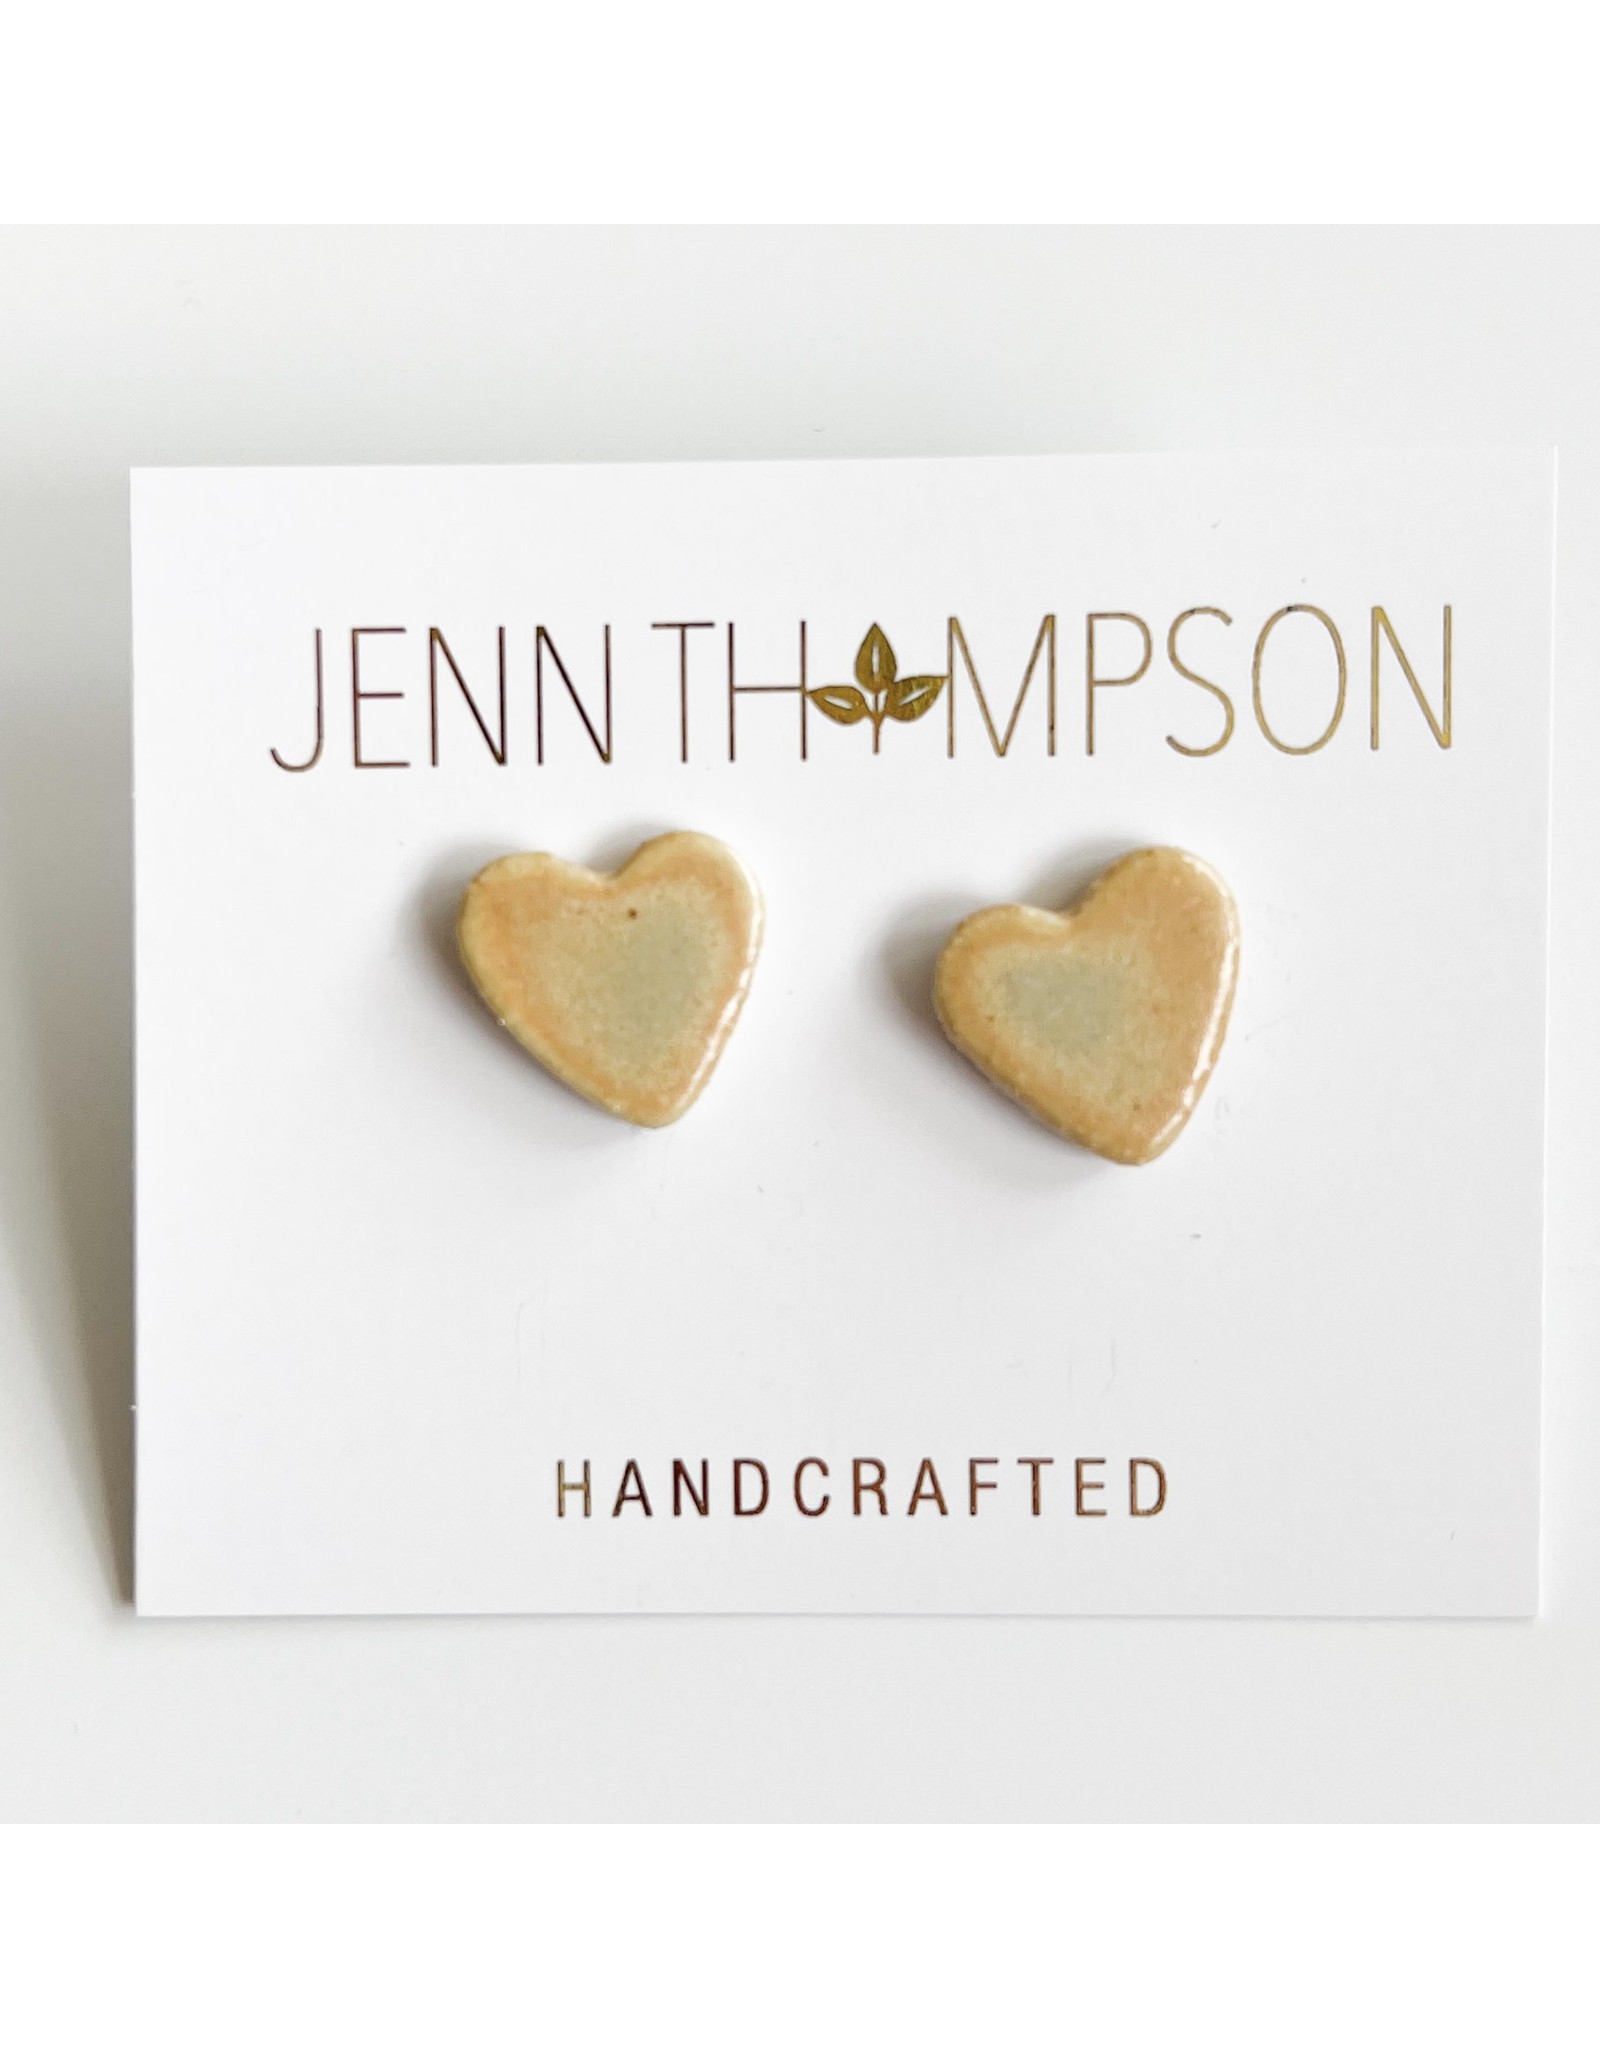 The Florist & The Merchant Heart Handcrafted Clay Earrings